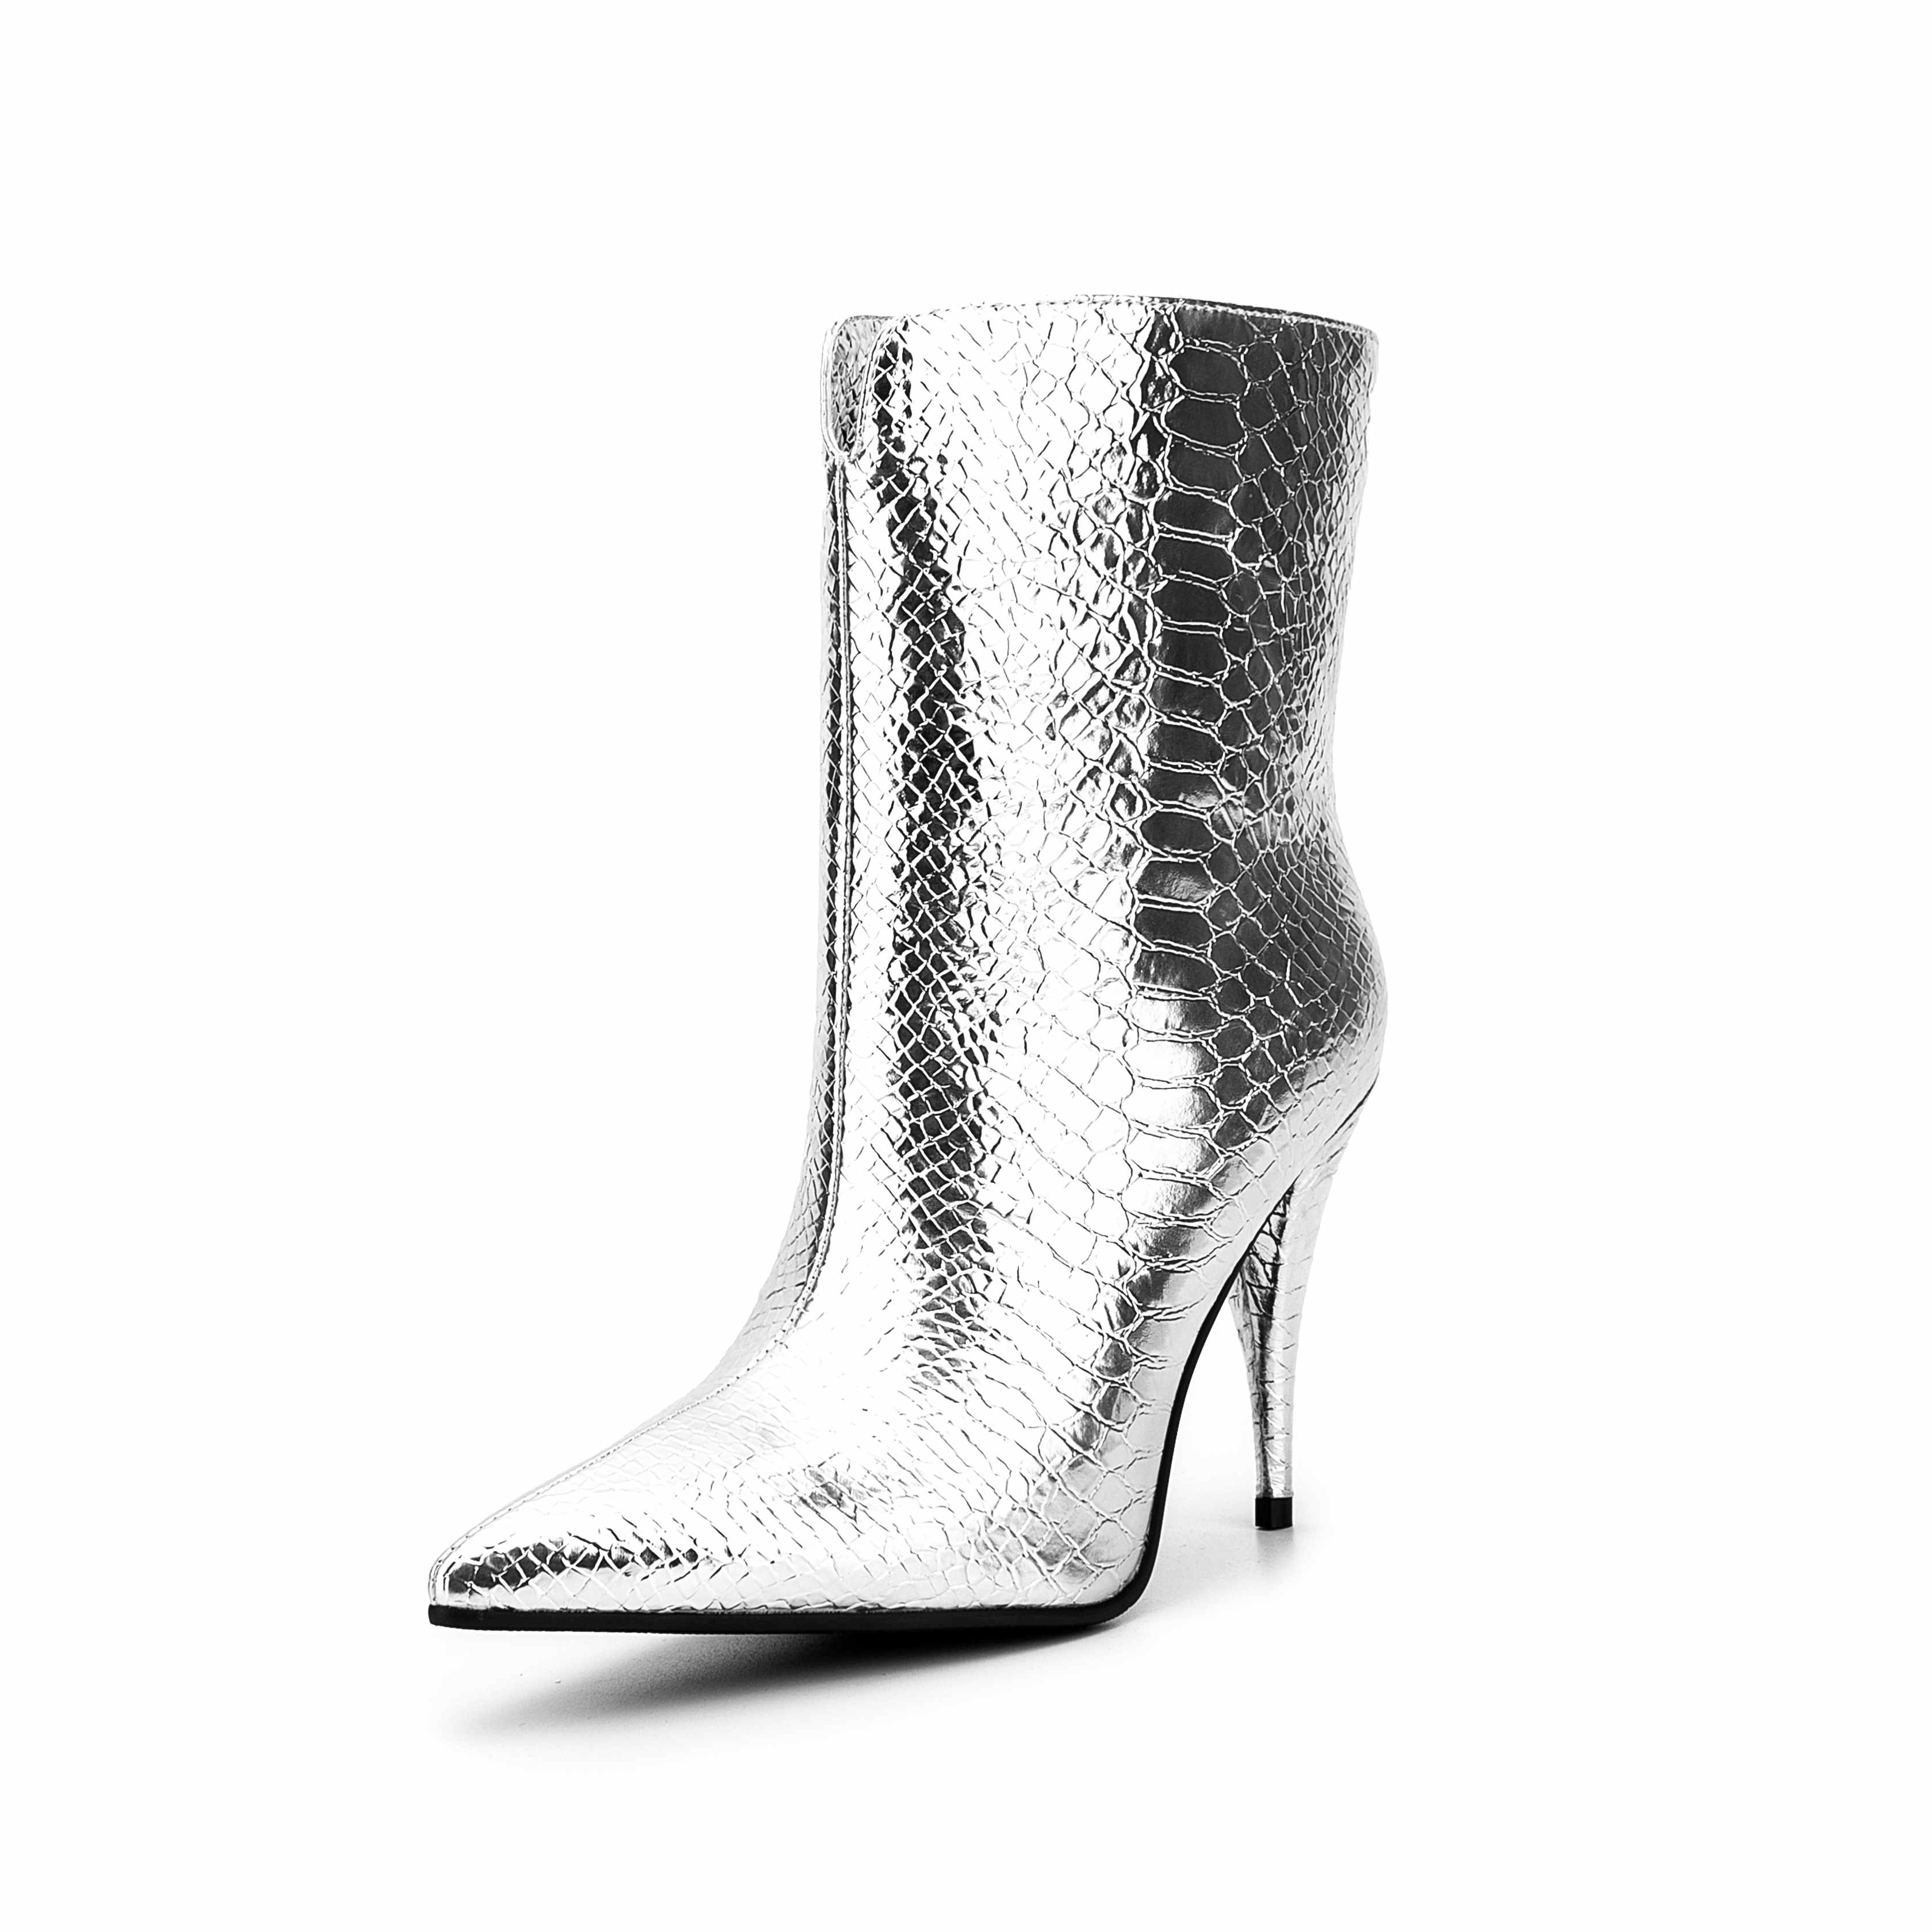 TAAFO Women Cone High Heels Shoes Silver Snake Print Ladies Party Wide Ankle Boots